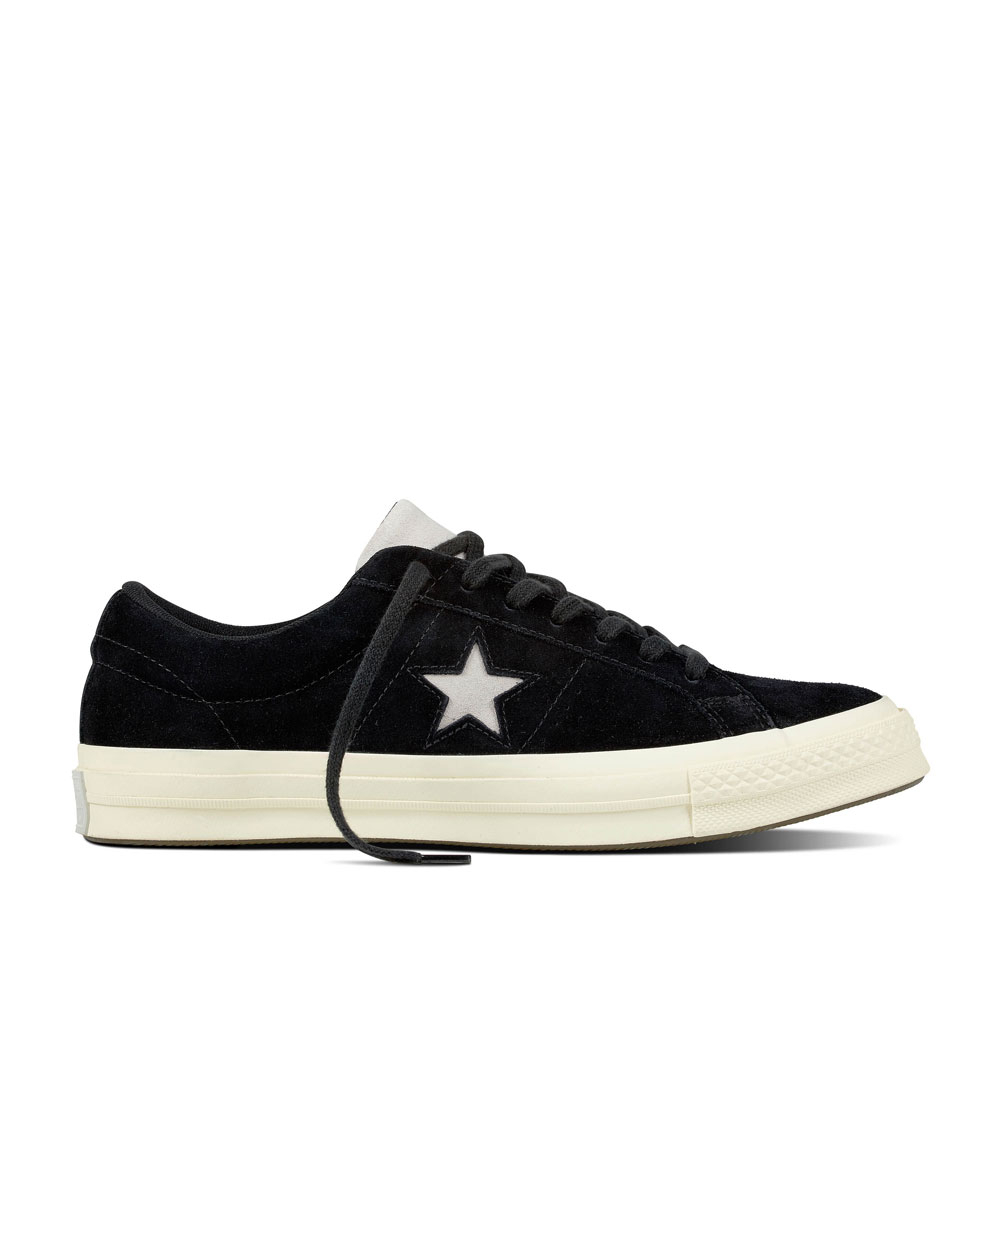 Converse One Star Ox (black/mouse/egret)